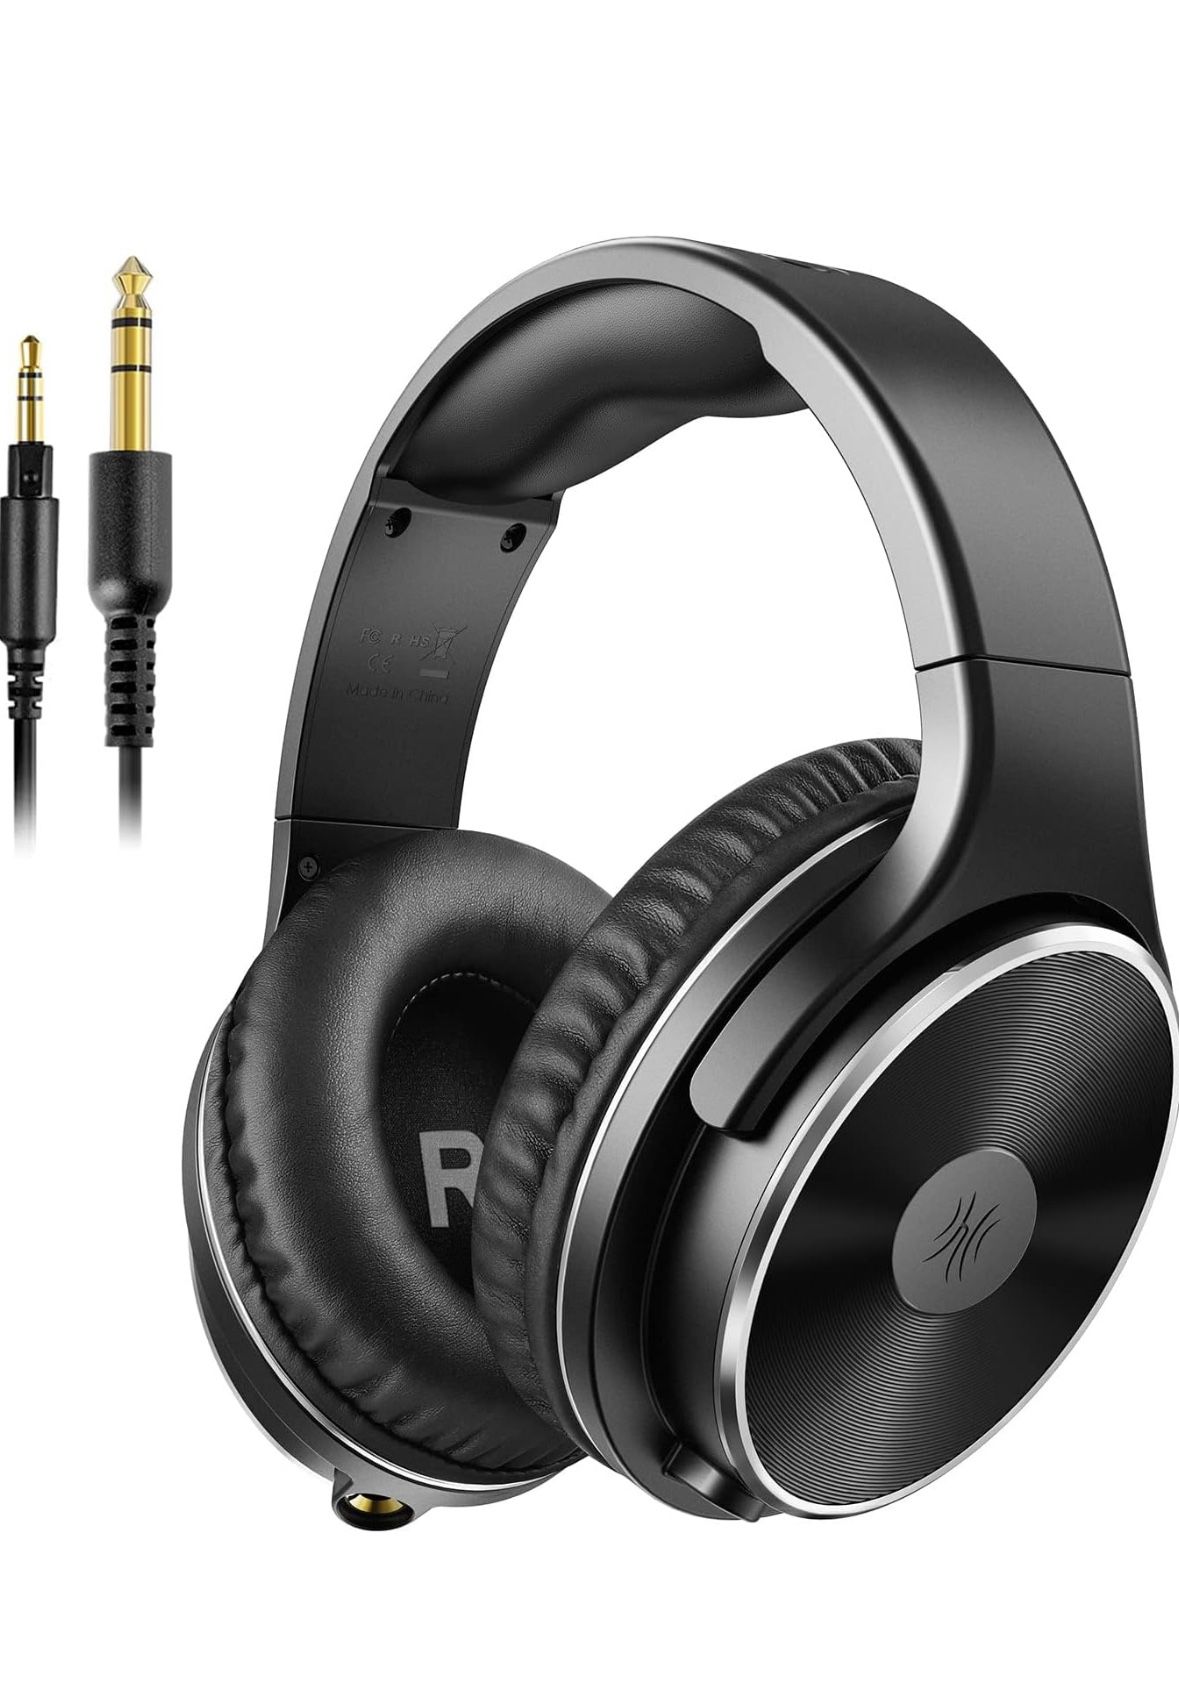 OneOdio Wired Headphones - Over Ear Headphones with Noise Isolation Dual Jack Professional Studio Monitor